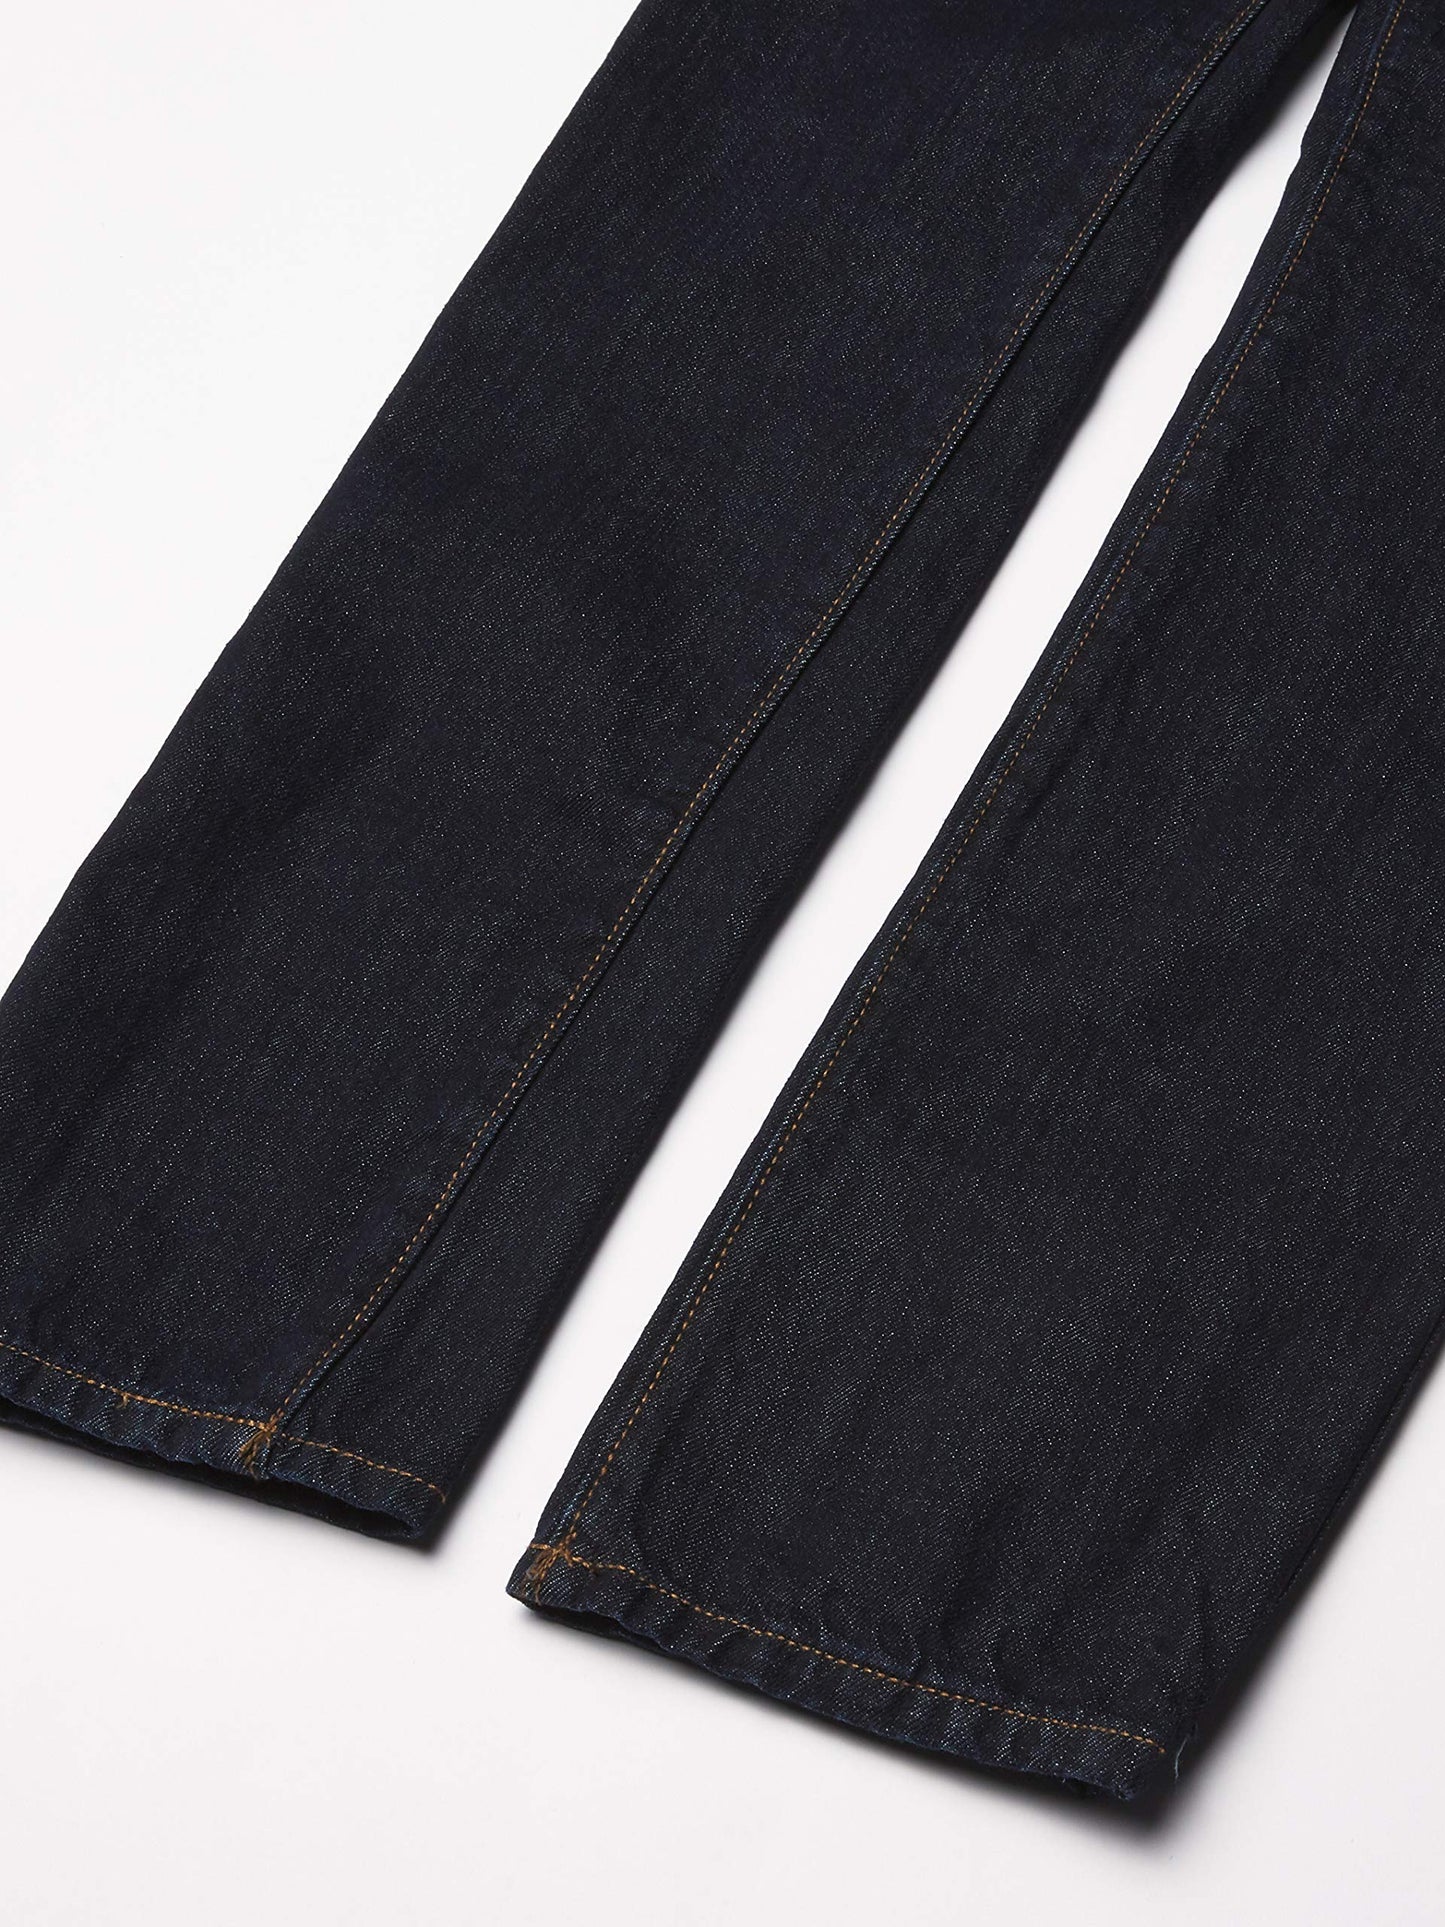 The Children's Place boys Basic Skinny Jeans Jeans